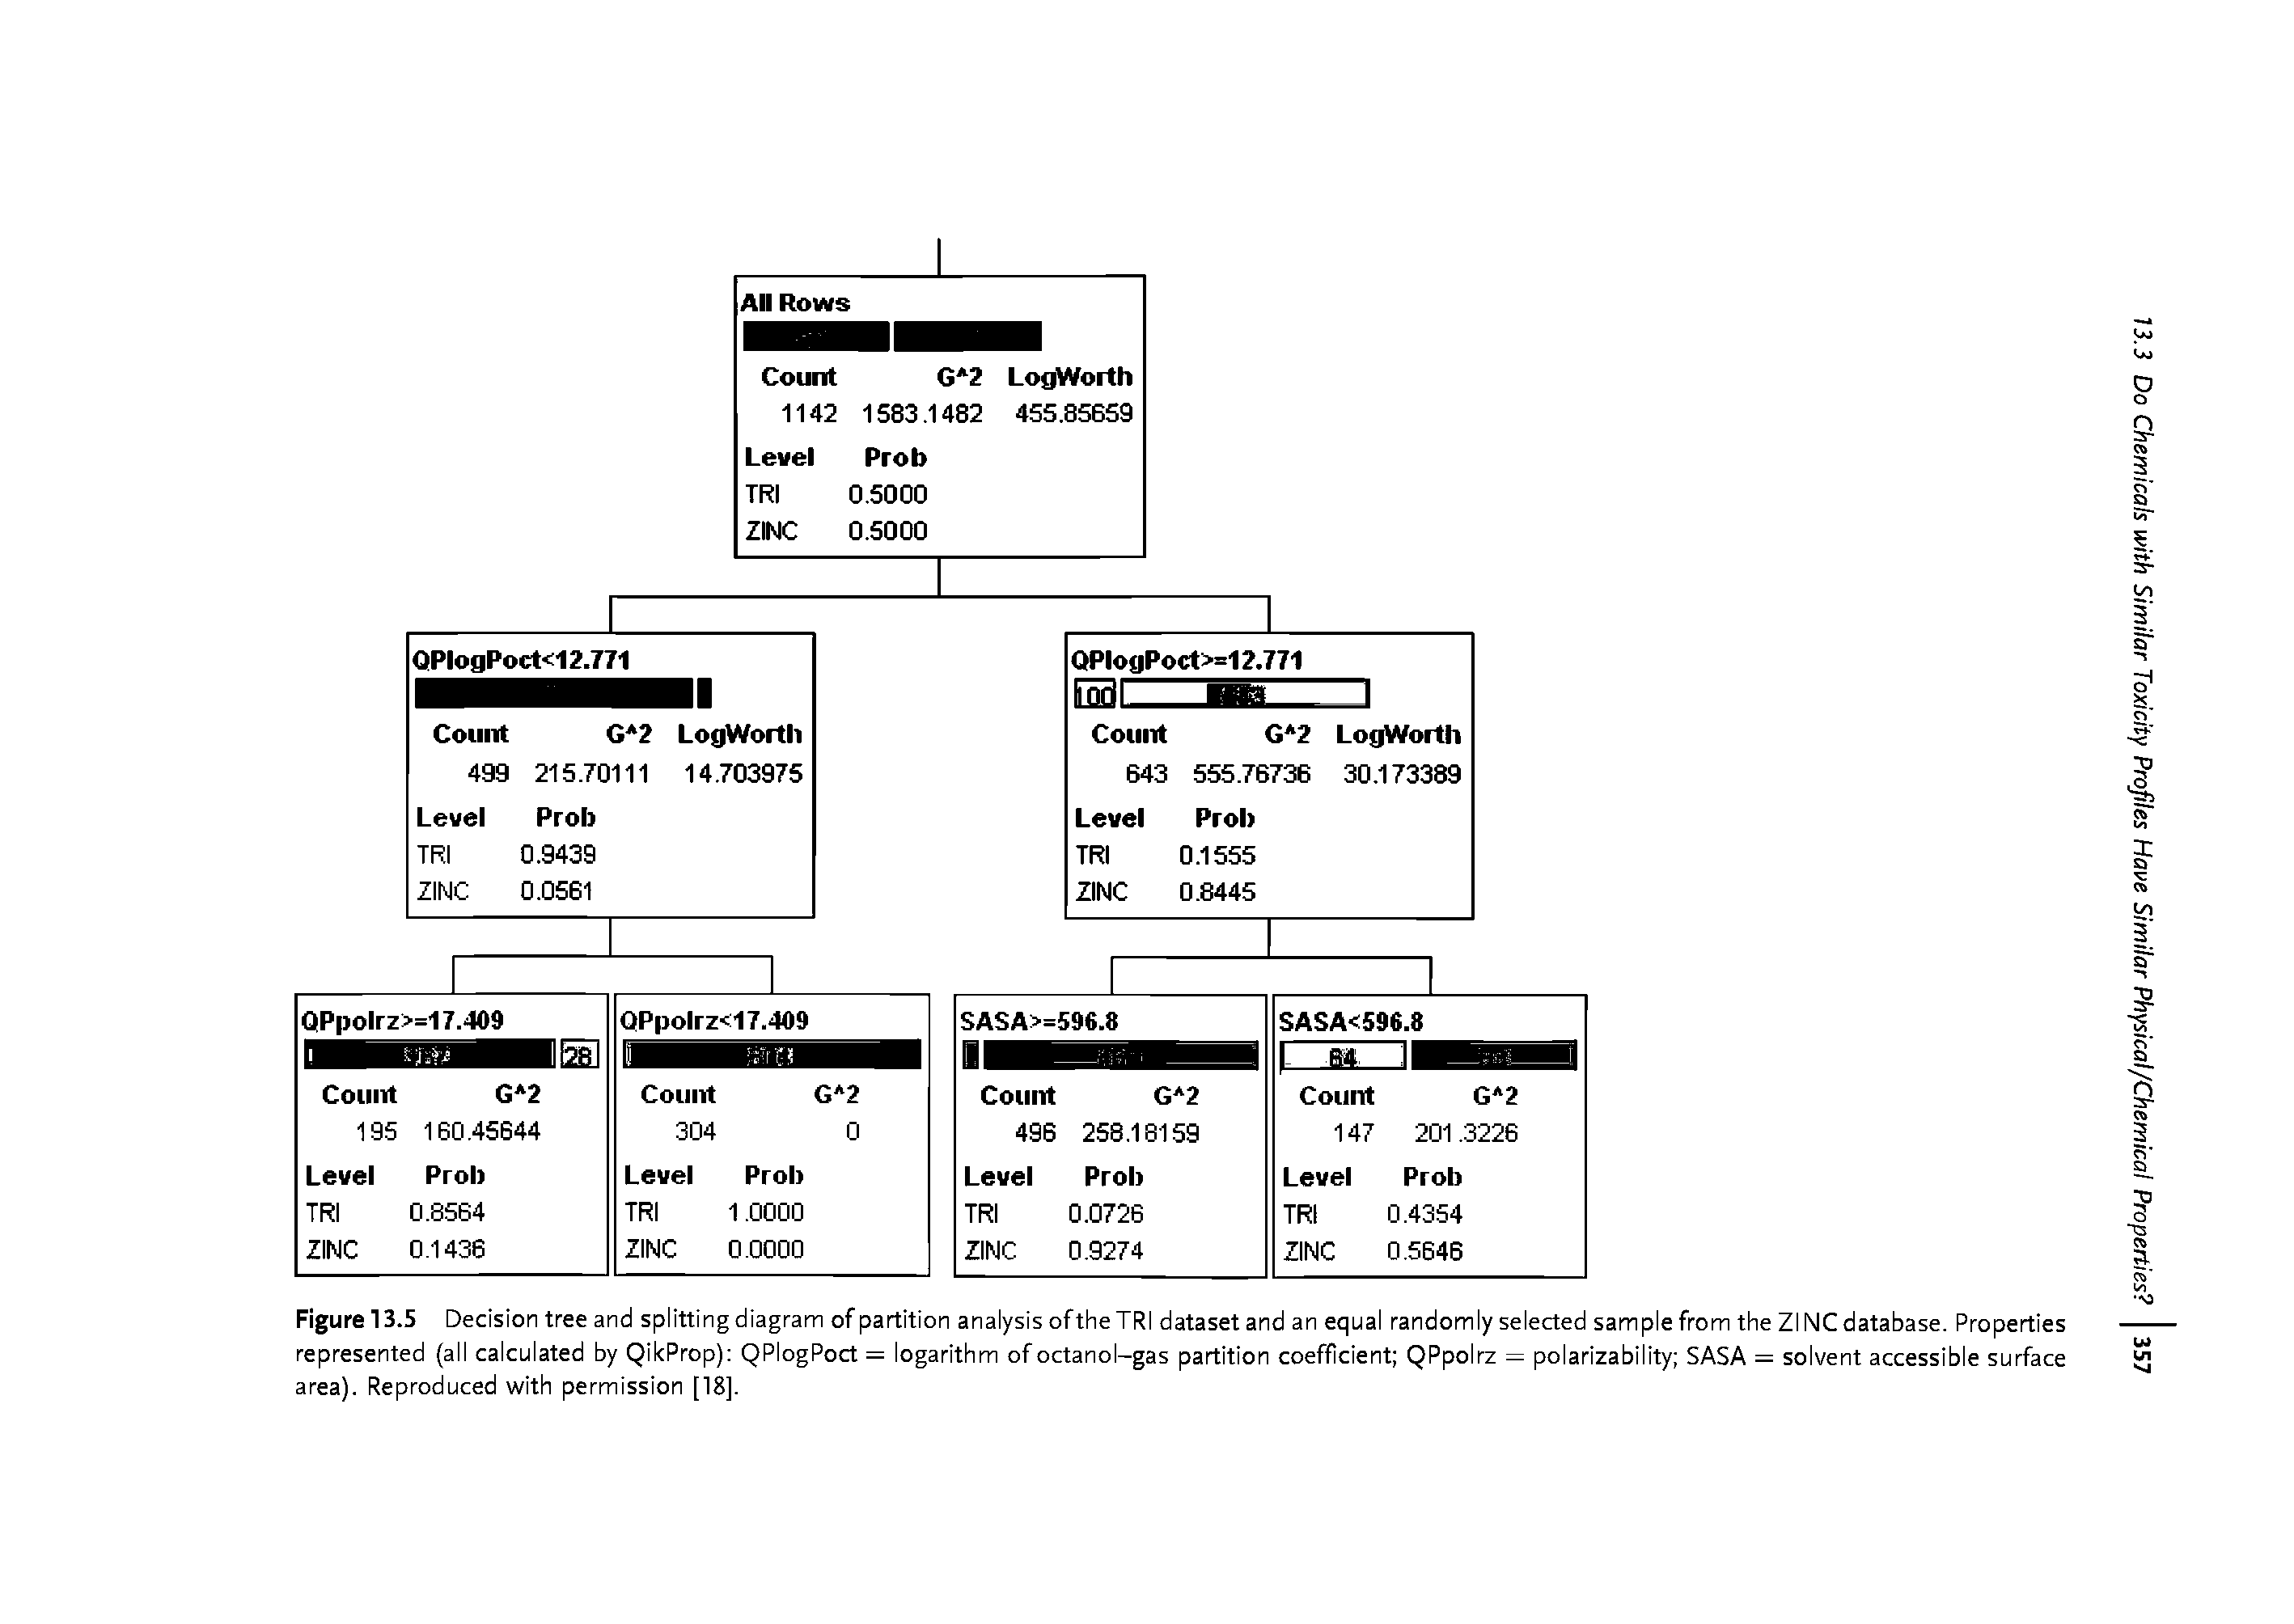 Figure 13.5 Decision tree and splitting diagram of partition analysis oftheTRI dataset and an equal randomly selected sample from the Zl NC database. Properties represented (all calculated by QikProp) QPlogPoct = logarithm of octanol-gas partition coefficient QPpolrz = polarizability SASA = solvent accessible surface area). Reproduced with permission [18].